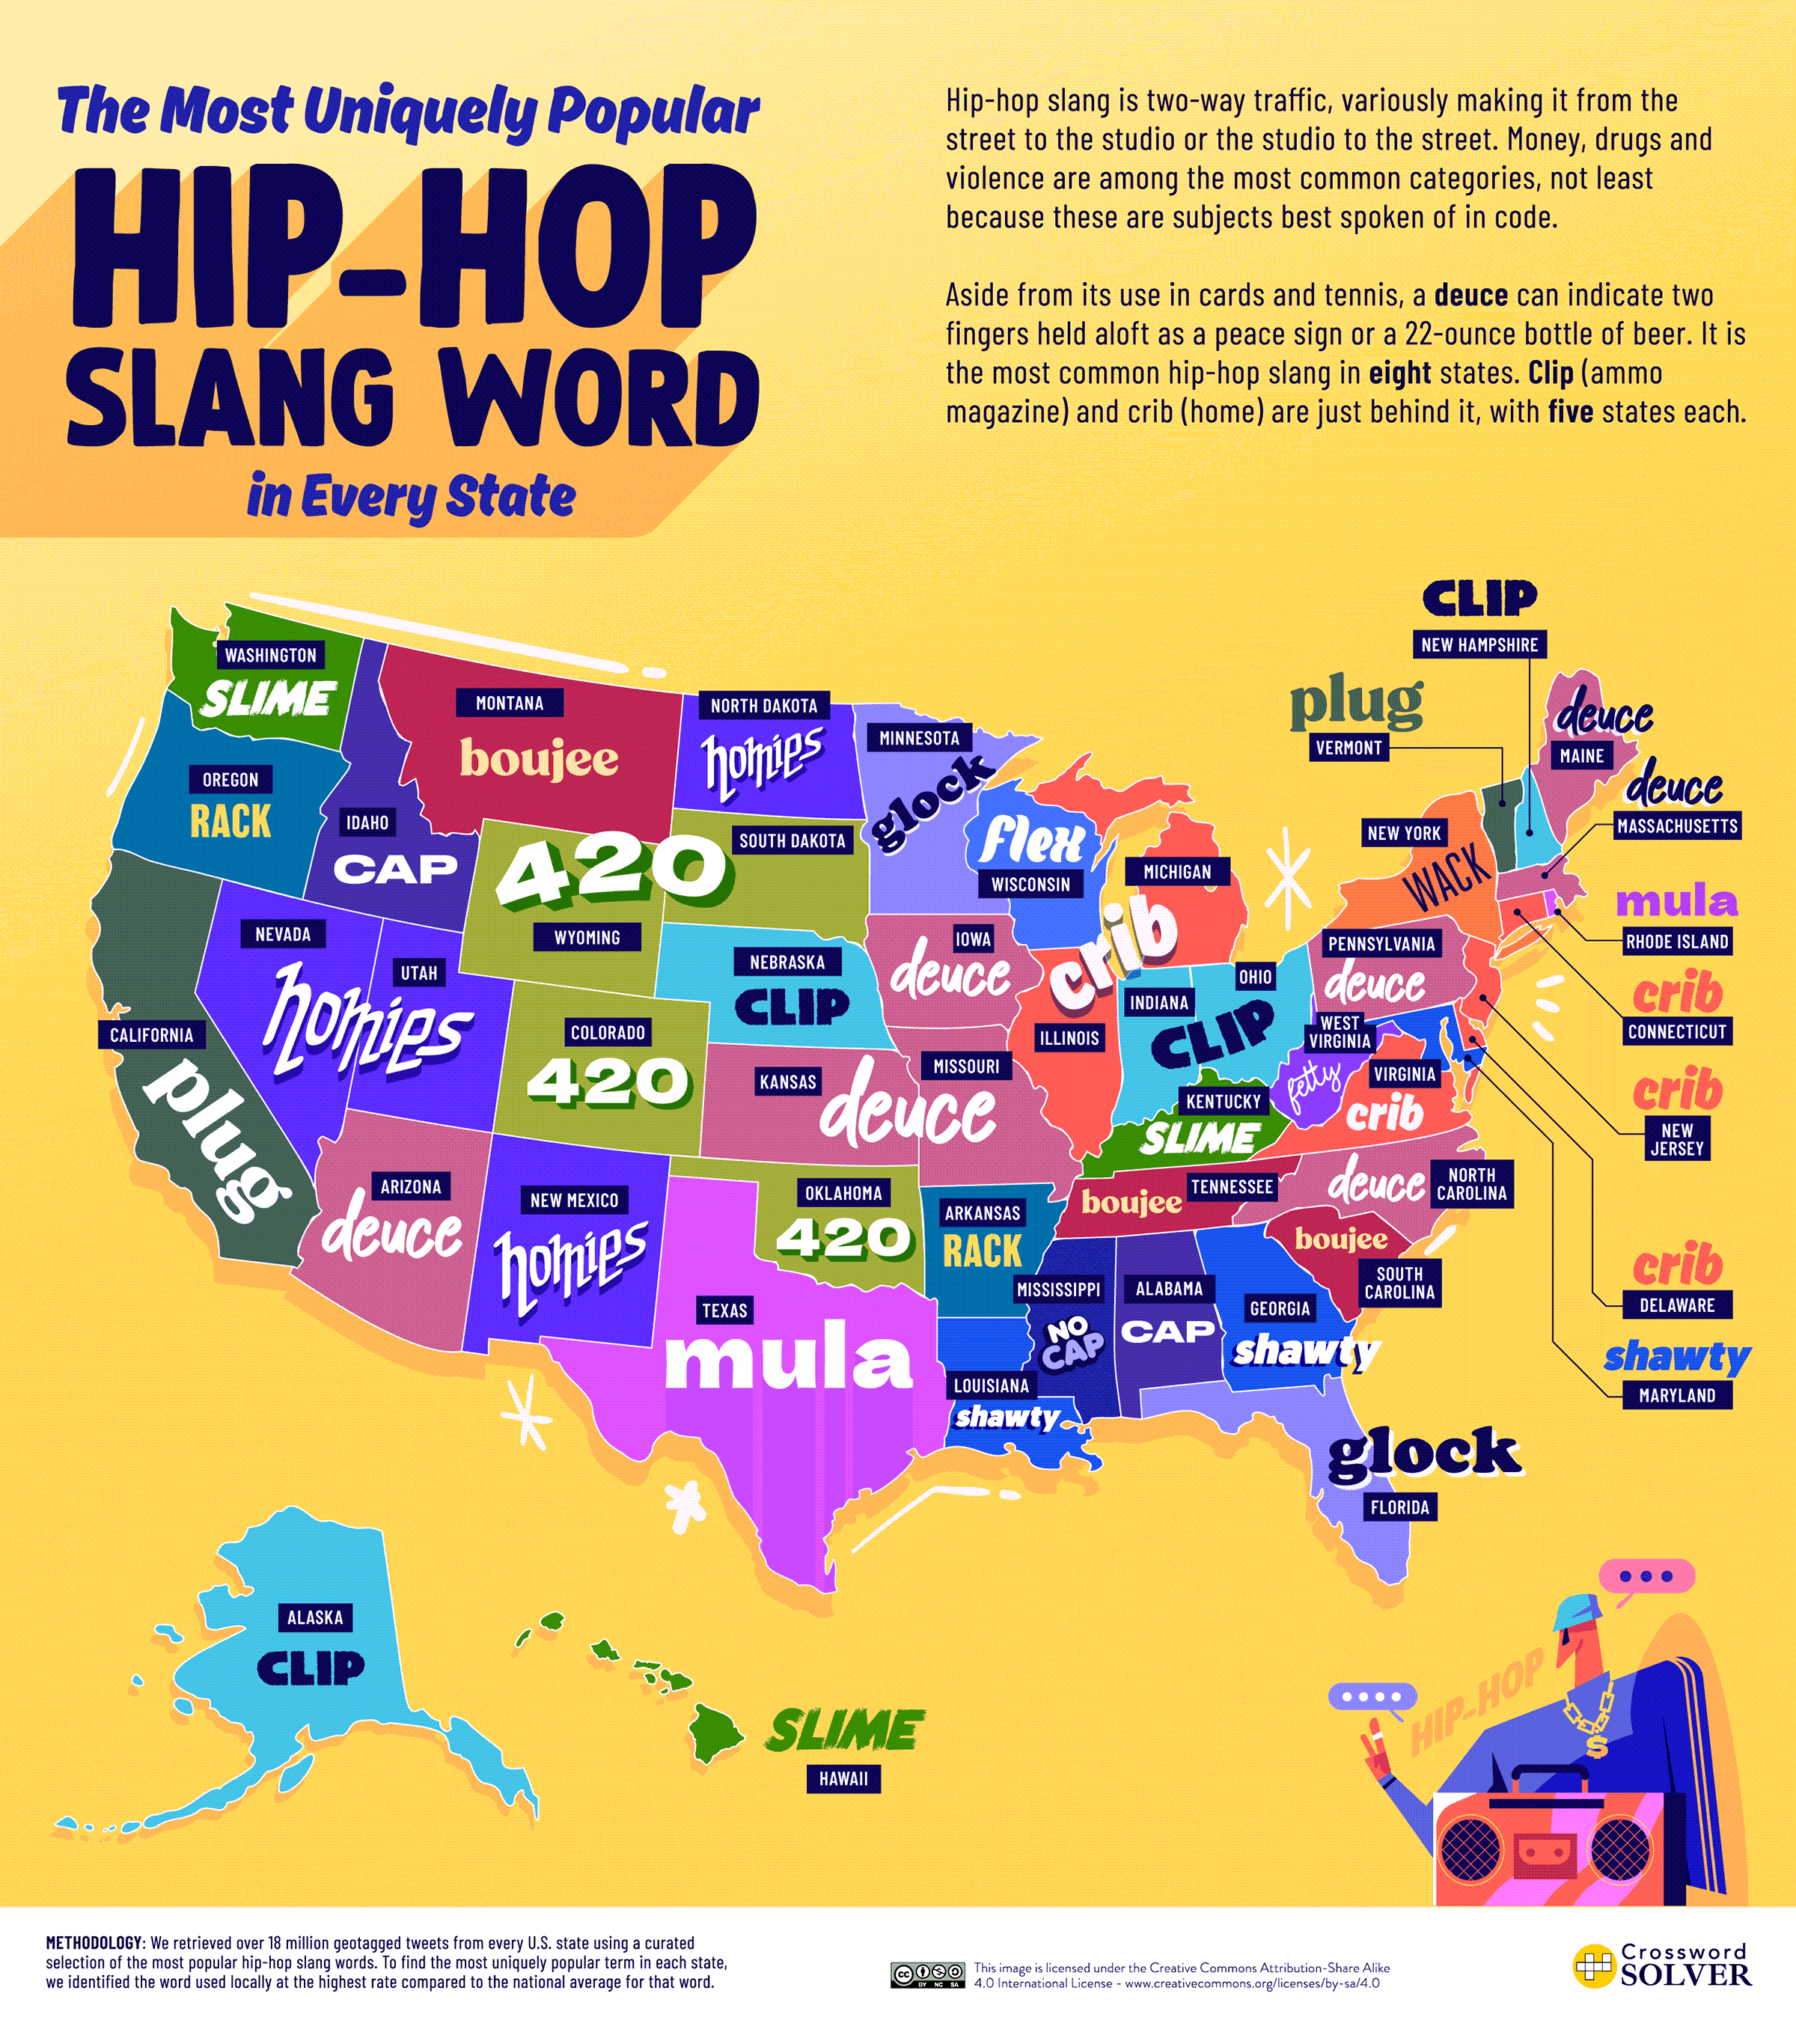 Word map of the US showing slang by state (hip-hop terms)